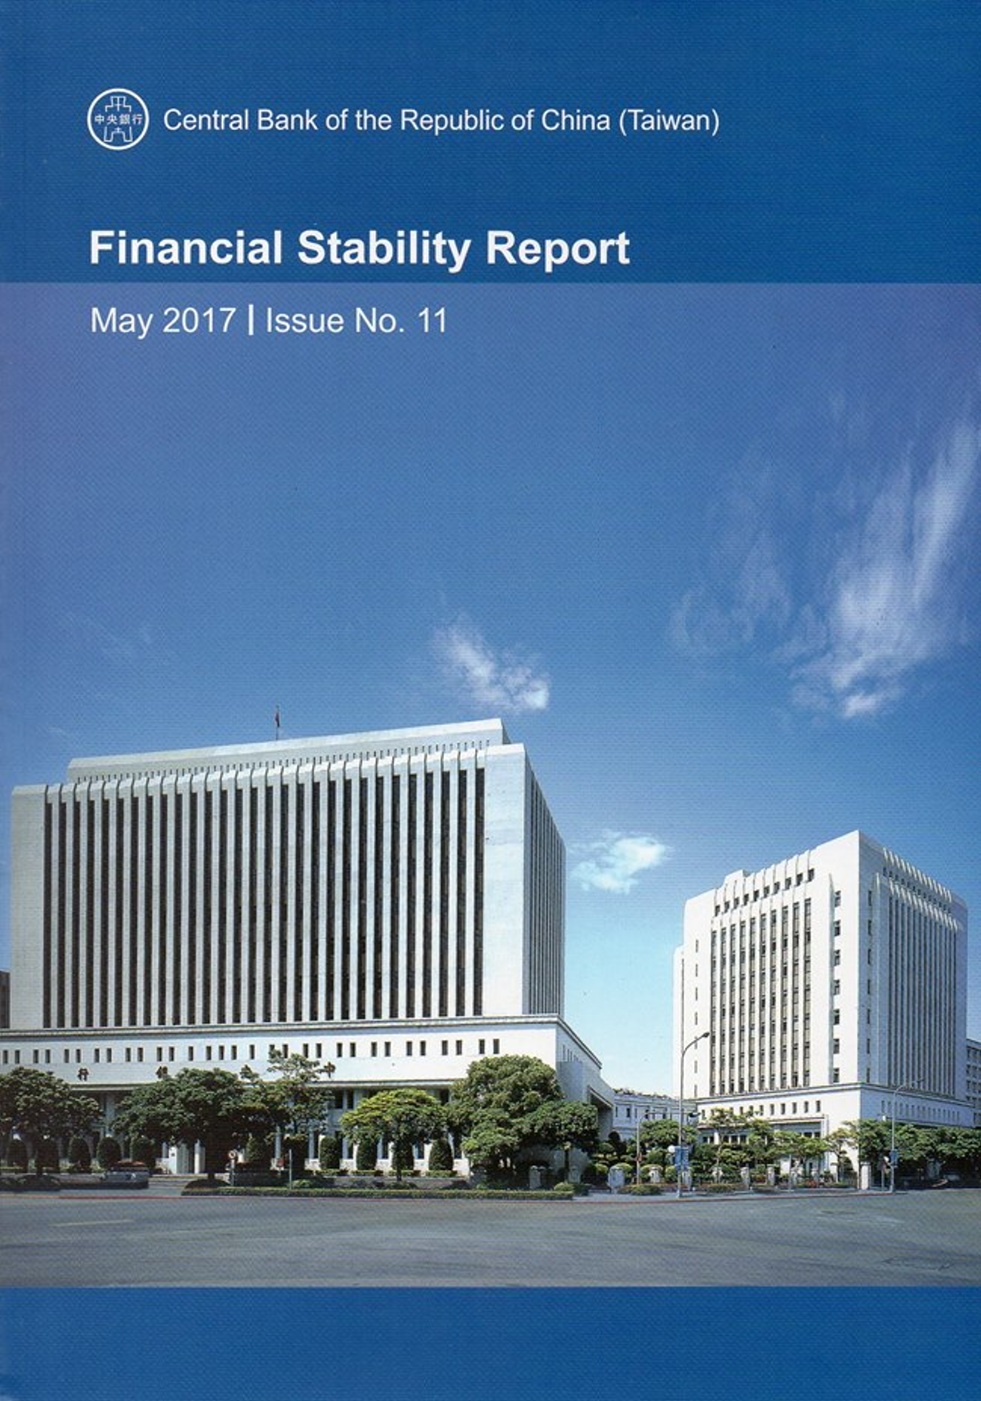 Financial Stability Report May 2017/Issue No.11